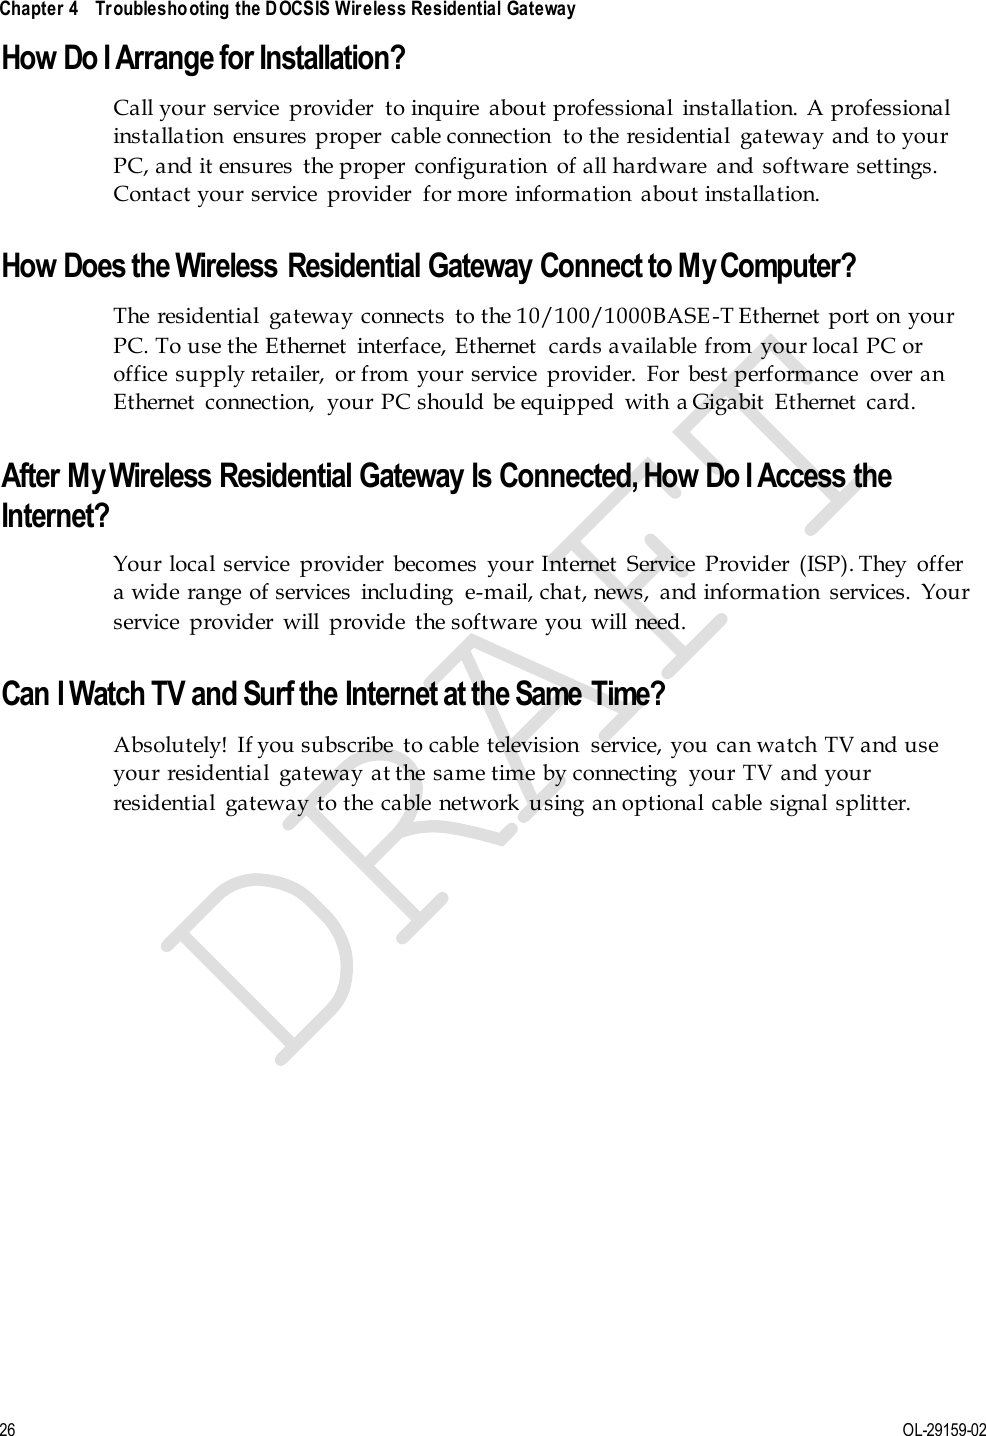  Chapter 4    Troubleshooting the DOCSIS Wireless Residential Gateway     26 OL-29159-02 How Do I Arrange for Installation? Call your  service  provider  to inquire  about professional  installation.  A professional installation  ensures proper  cable connection  to the residential  gateway and to your PC, and it ensures  the proper  configuration  of all hardware  and  software  settings. Contact your service  provider  for more  information  about installation.  How Does the Wireless Residential Gateway Connect to My Computer? The  residential  gateway connects  to the 10/100/1000BASE-T Ethernet  port on your PC. To use the Ethernet  interface, Ethernet  cards available from your local PC or office supply retailer,  or from  your service  provider.  For  best performance  over an Ethernet  connection,  your PC should  be equipped  with a Gigabit  Ethernet  card.   After My Wireless Residential Gateway Is Connected, How Do I Access the Internet? Your  local service  provider  becomes  your Internet  Service  Provider  (ISP). They  offer a wide range  of services  including  e-mail, chat, news,  and information  services.  Your service  provider  will  provide  the software you will need.  Can I Watch TV and Surf the Internet at the Same Time? Absolutely!  If you subscribe  to cable television  service, you can watch TV and use your residential  gateway at the same time by connecting  your TV and your residential  gateway to the cable network  using an optional cable signal splitter.  